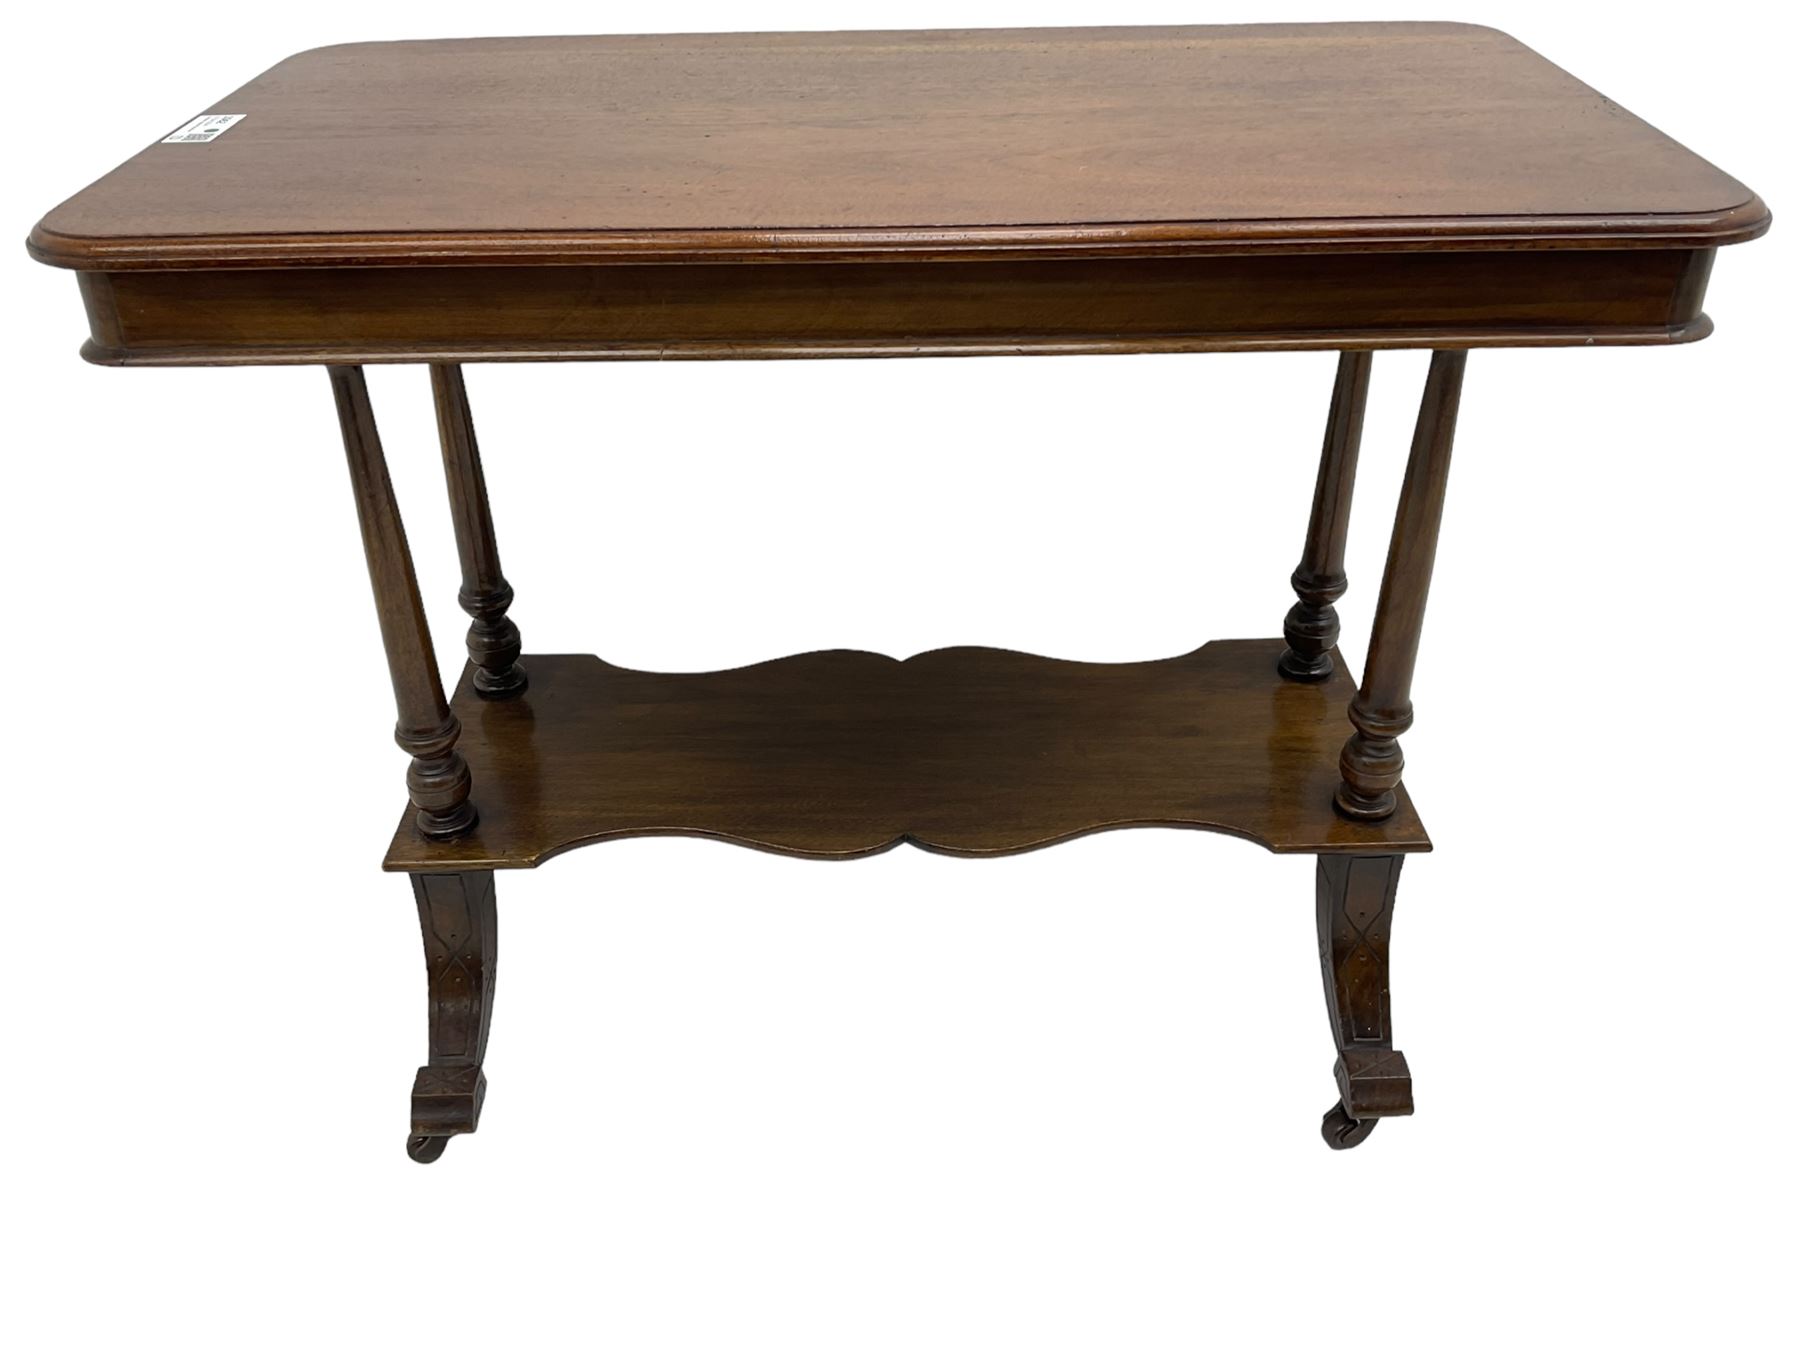 Late Victorian mahogany Aesthetic movement side table - Image 6 of 8